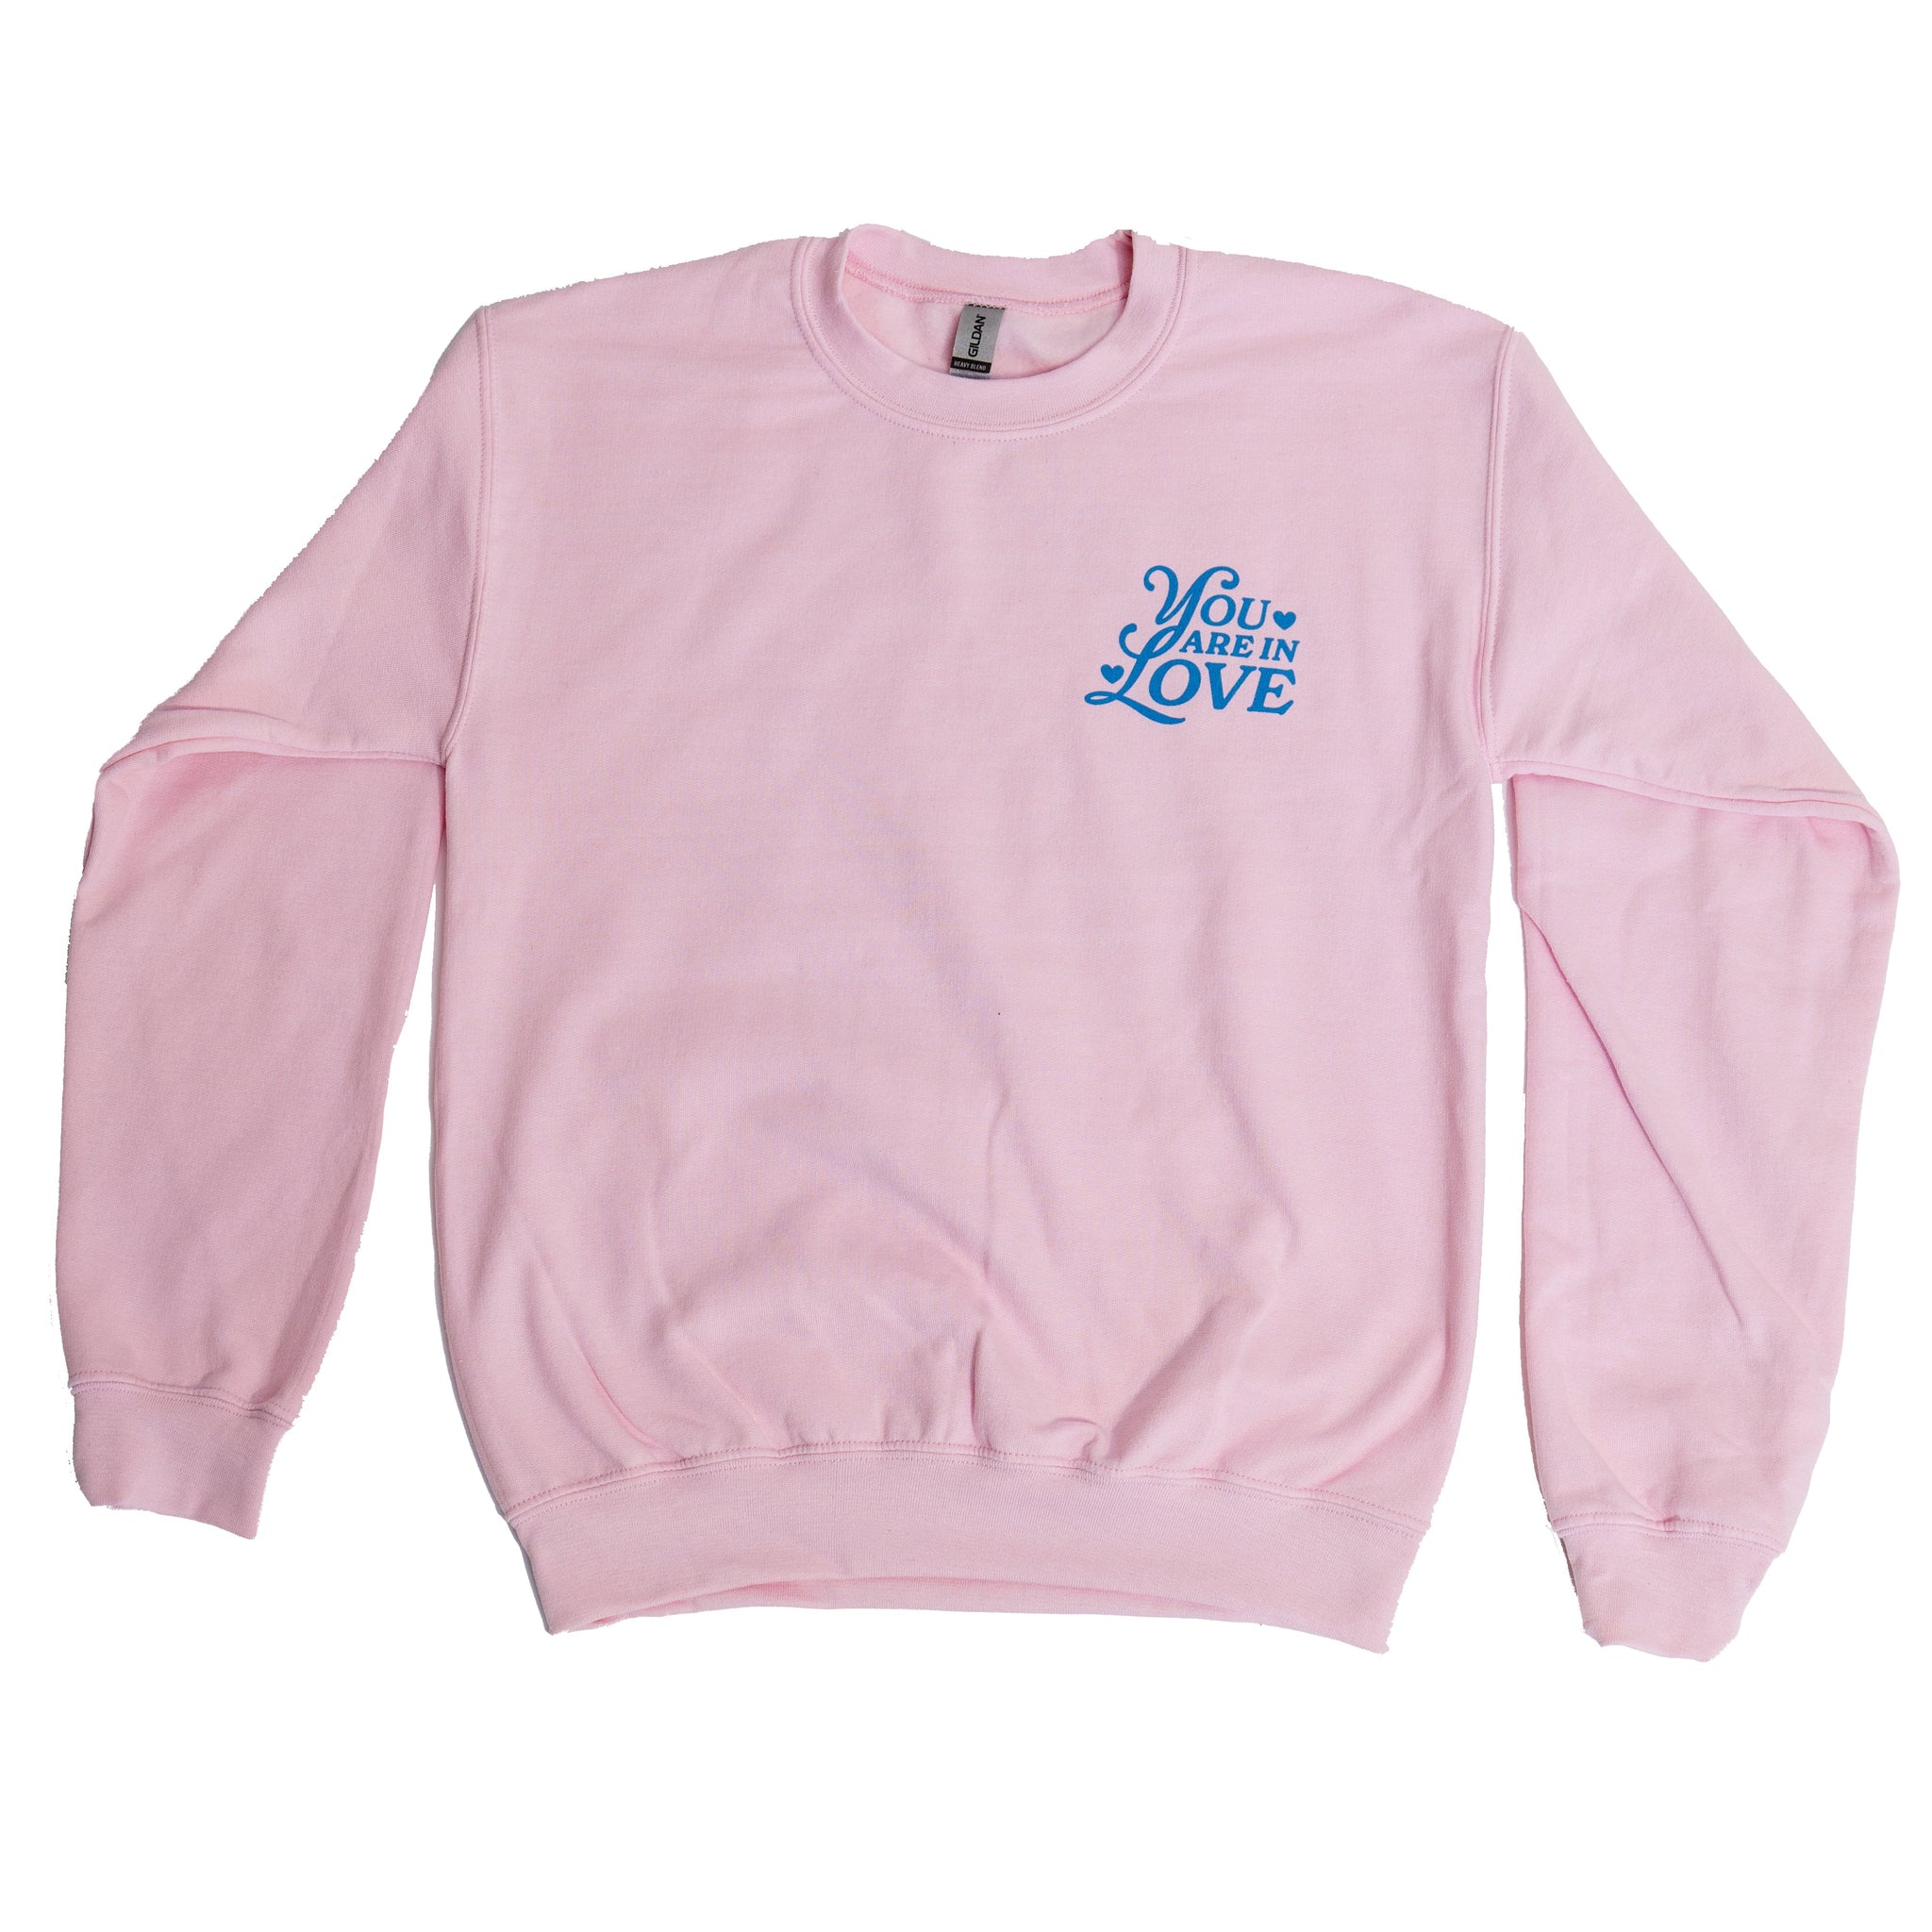 http://emacitythreads.com/cdn/shop/products/you-are-in-love-sweatshirt-306982.jpg?v=1701204664&width=2048